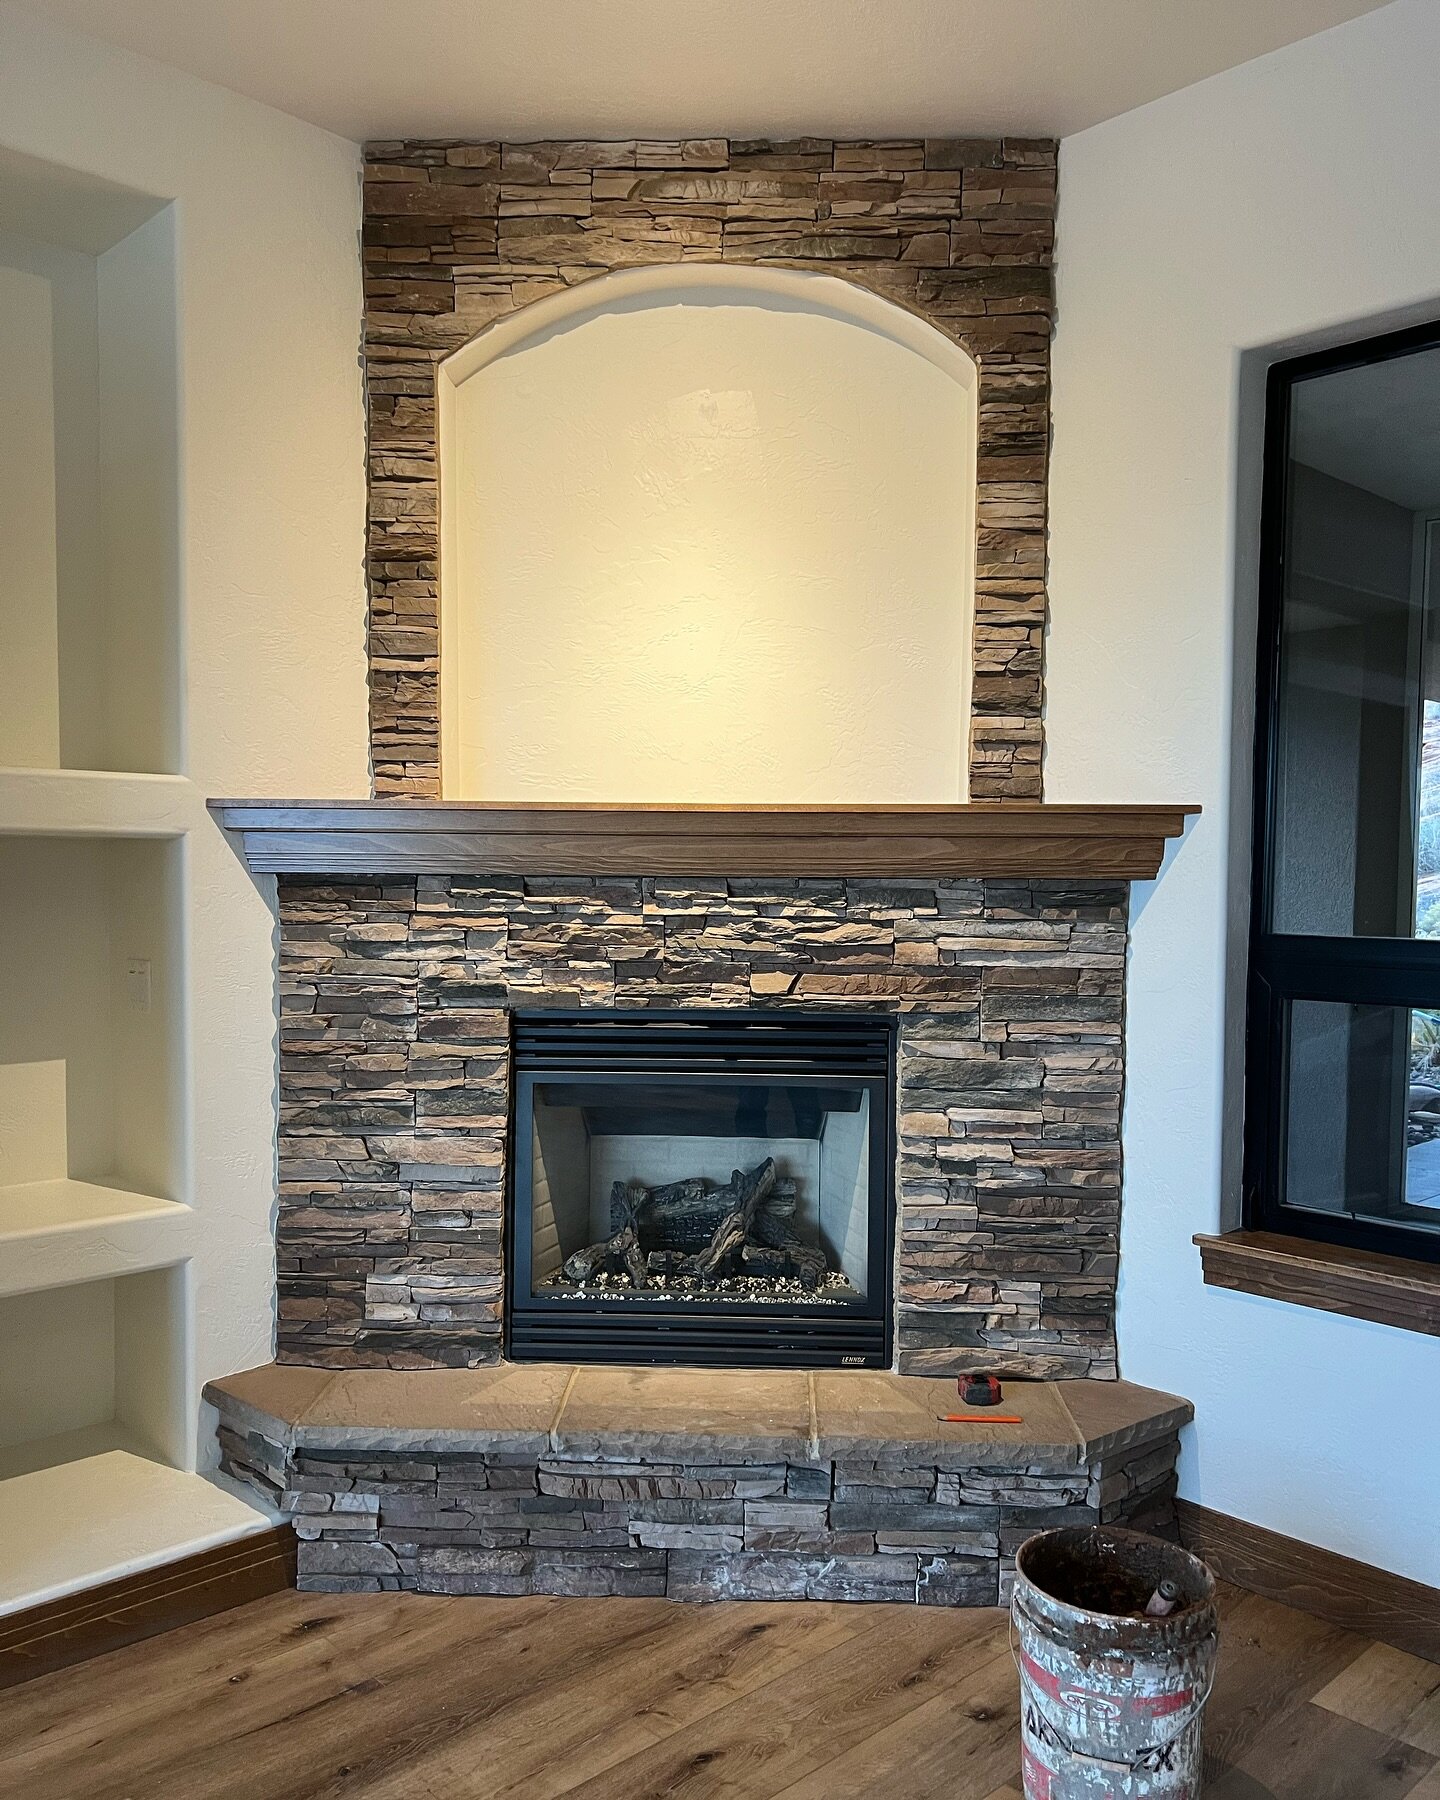 &ldquo;Transforming Dreams into Solid Structures &ndash; Unleash the Beauty of Precision Craftsmanship with Alpha Home Builders LLC. Elevate Your Space, Elevate Your Life. Quality Masonry, Timeless Elegance.&rdquo; 

#MasonryMasters #StoneCraftsmansh